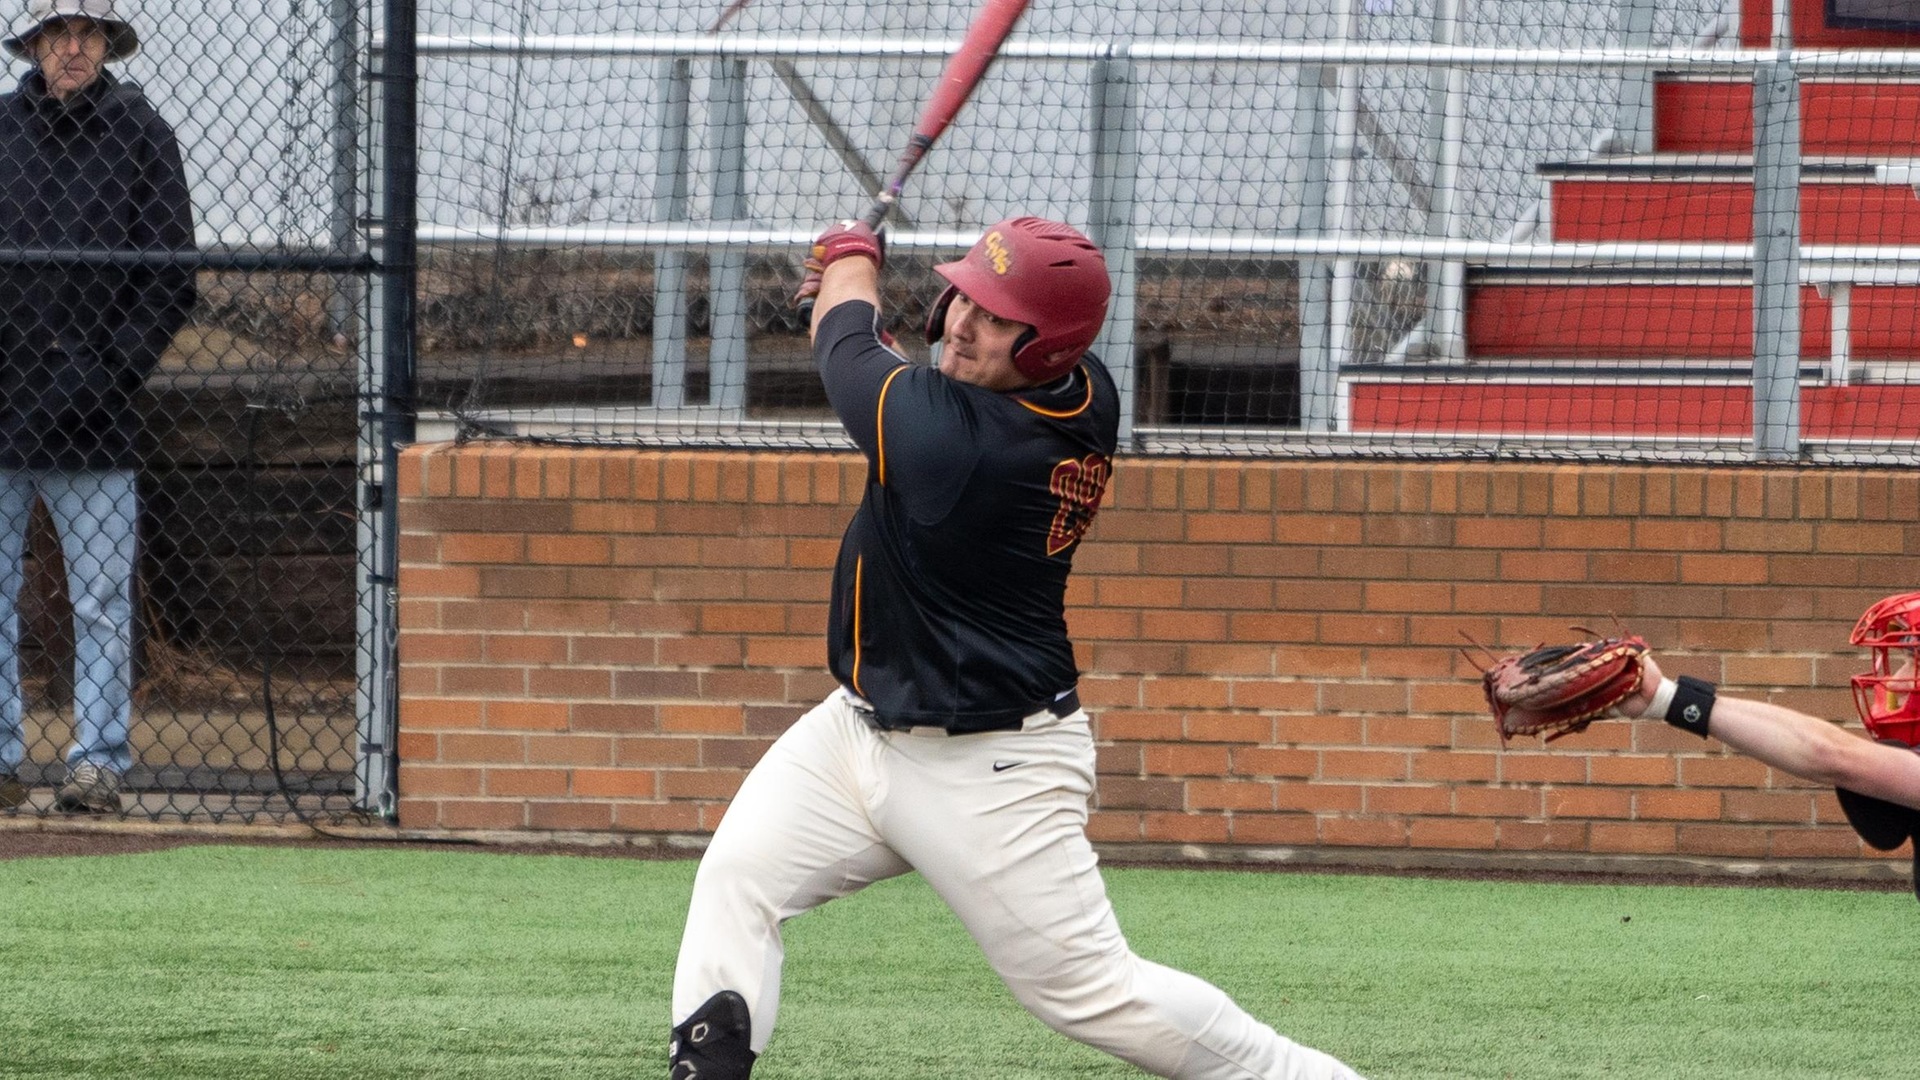 Andrew Mazzone hit his 13th homer for CMS (photo by Caleb Flegel)